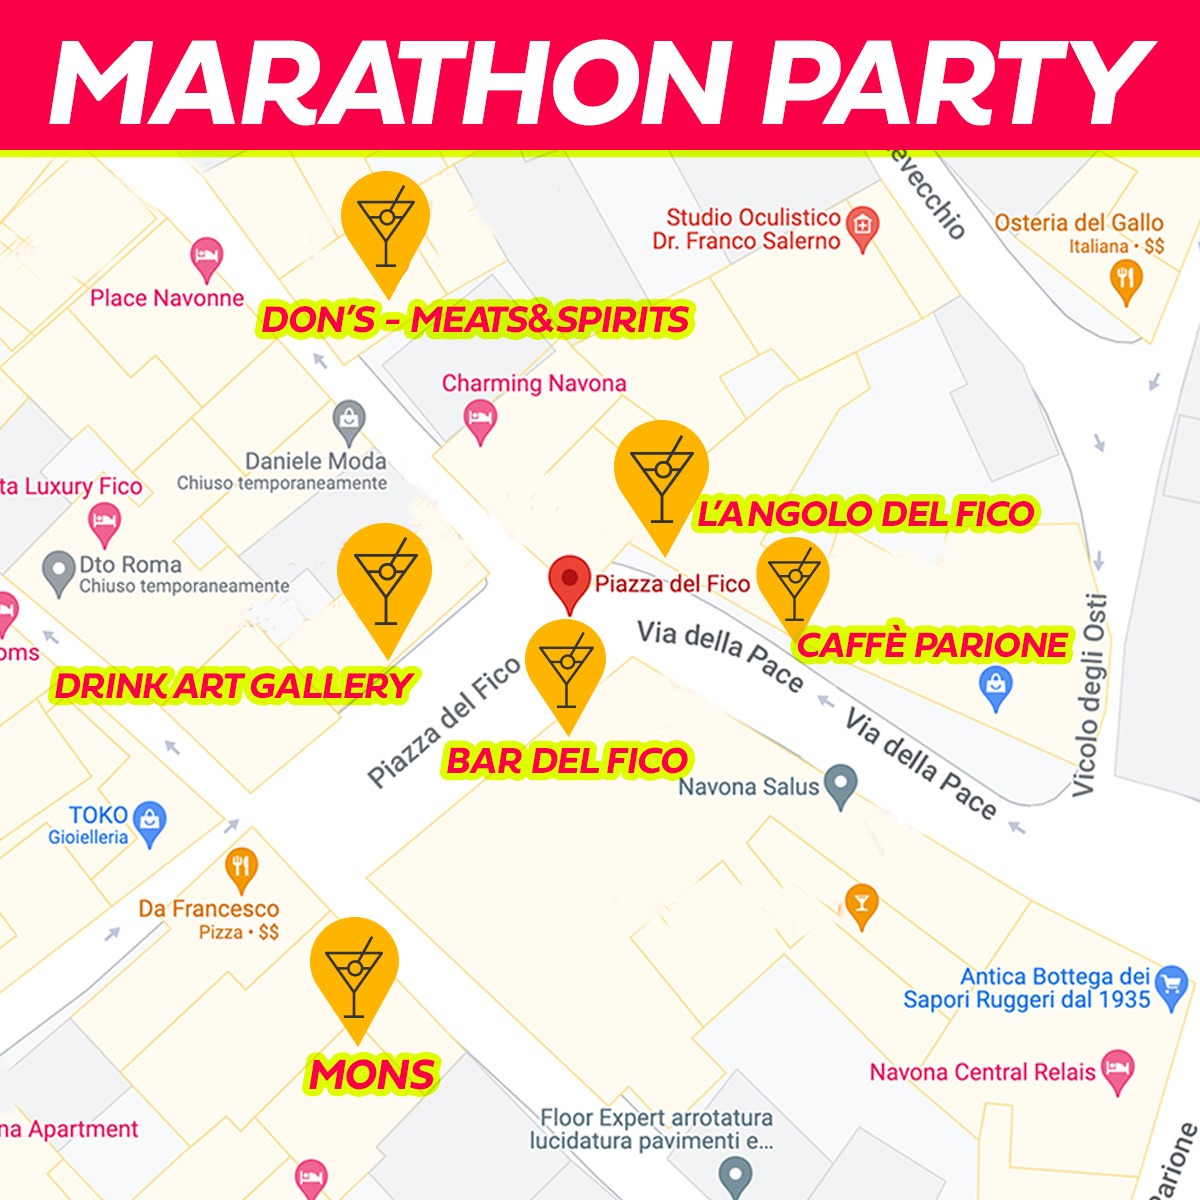 Take part in the Marathon Party, are you ready for the medal party?